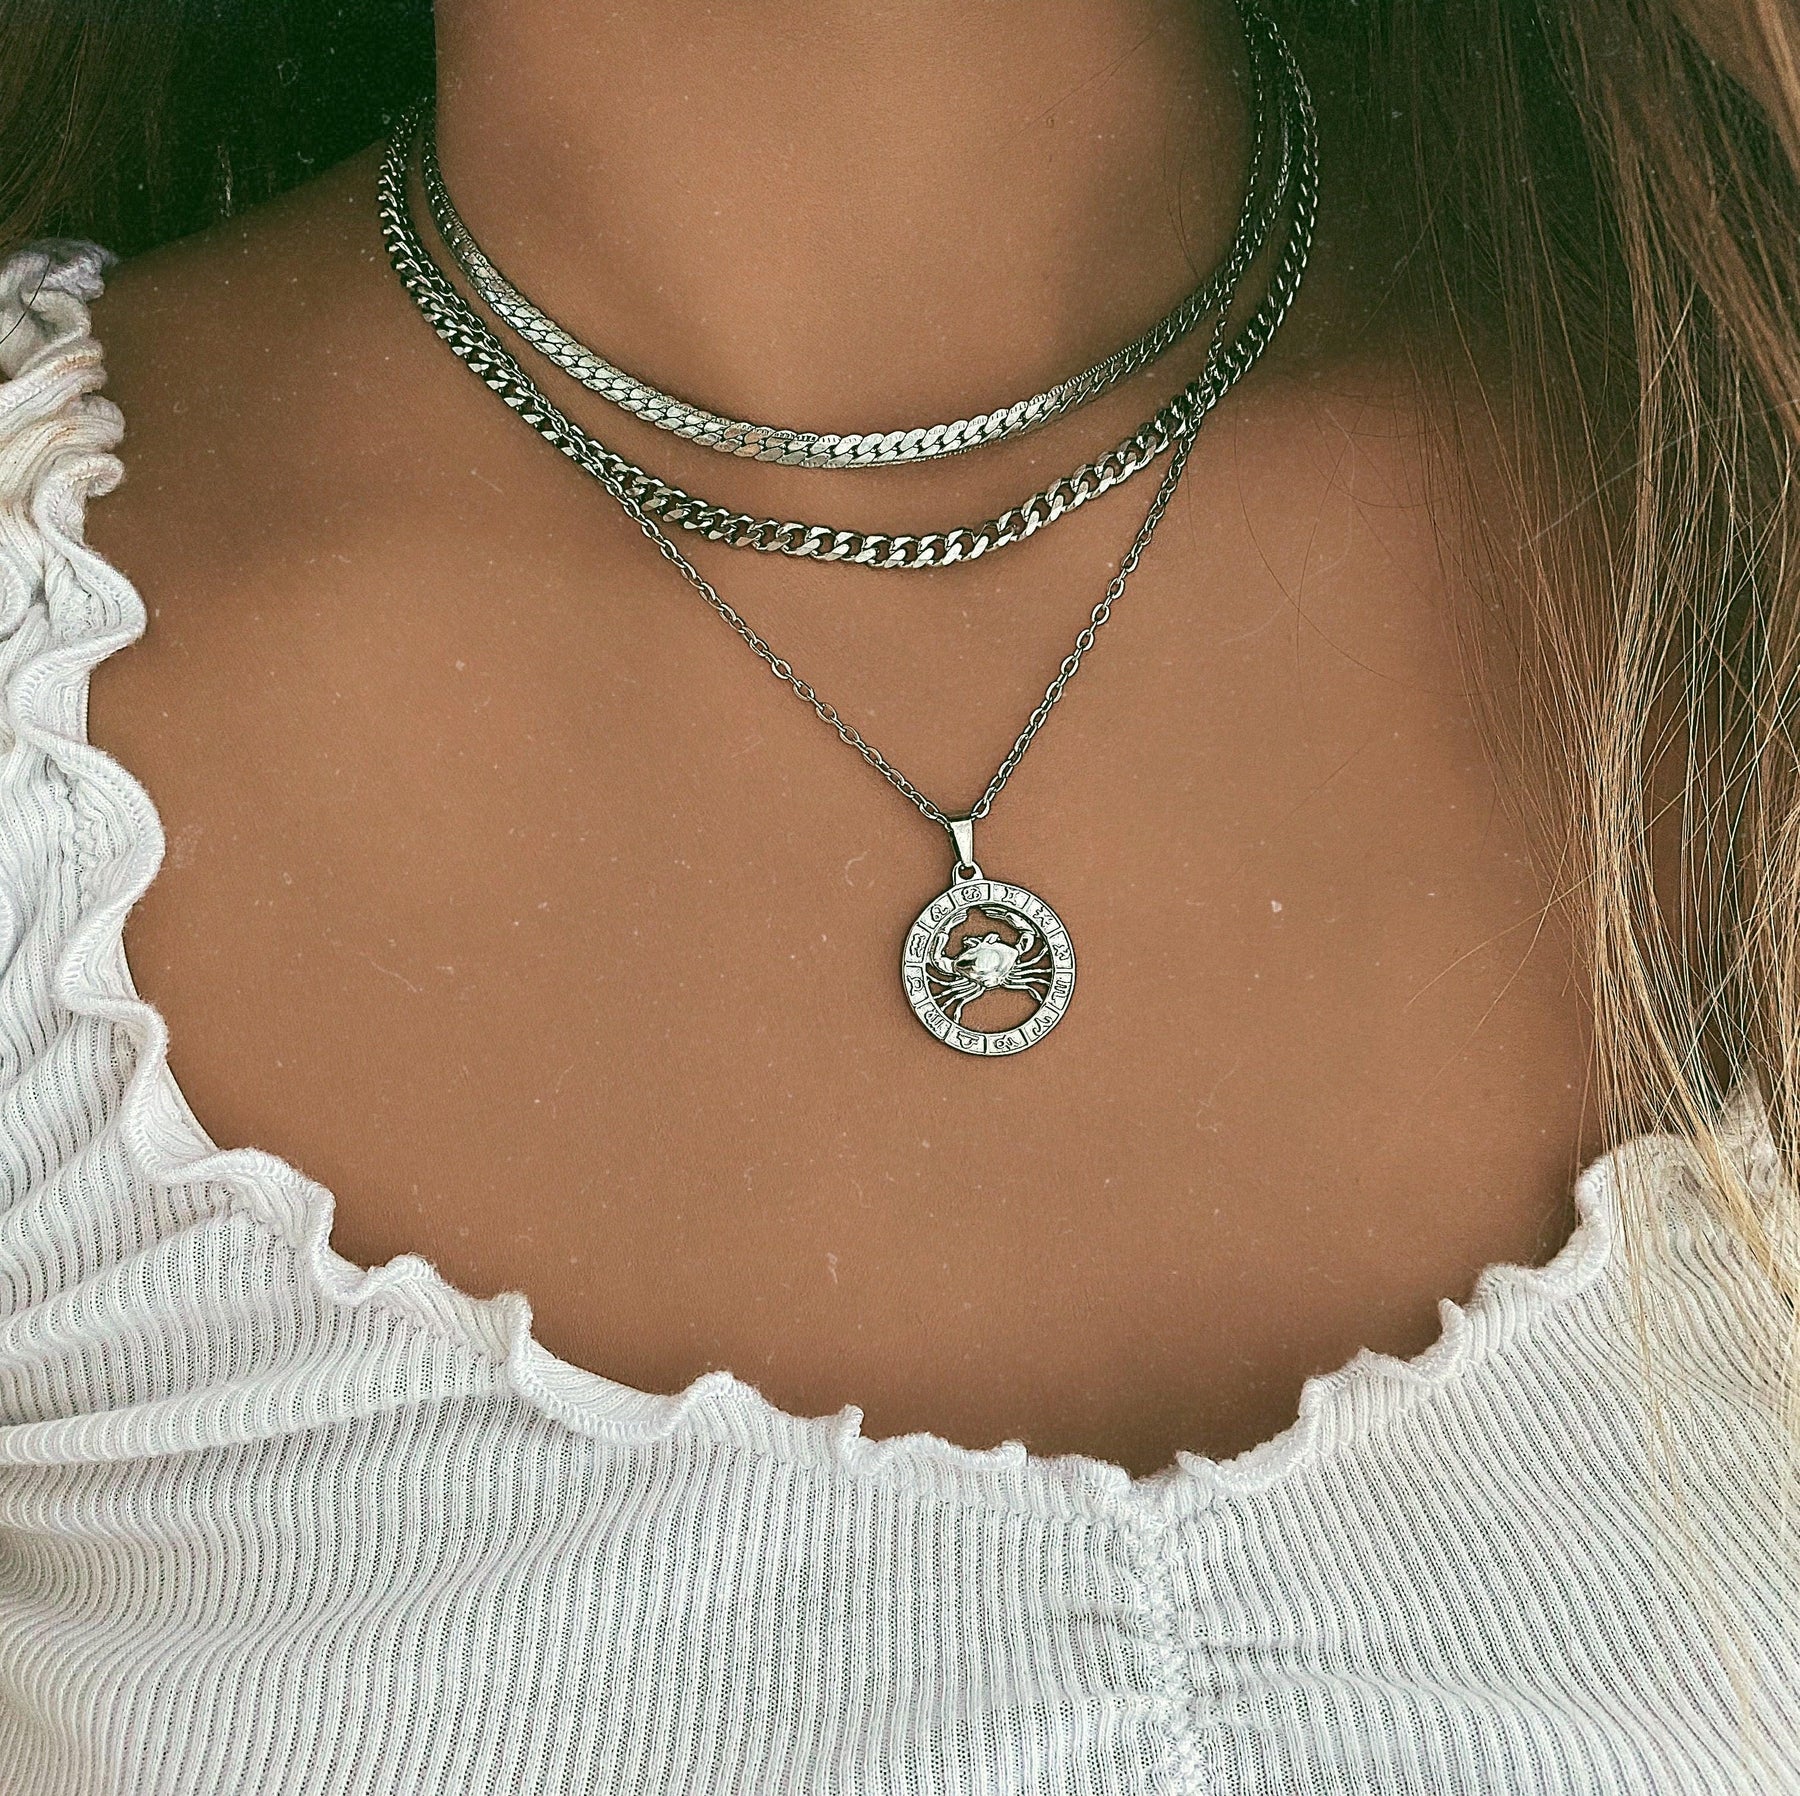 BohoMoon Stainless Steel Mia Choker / Necklace